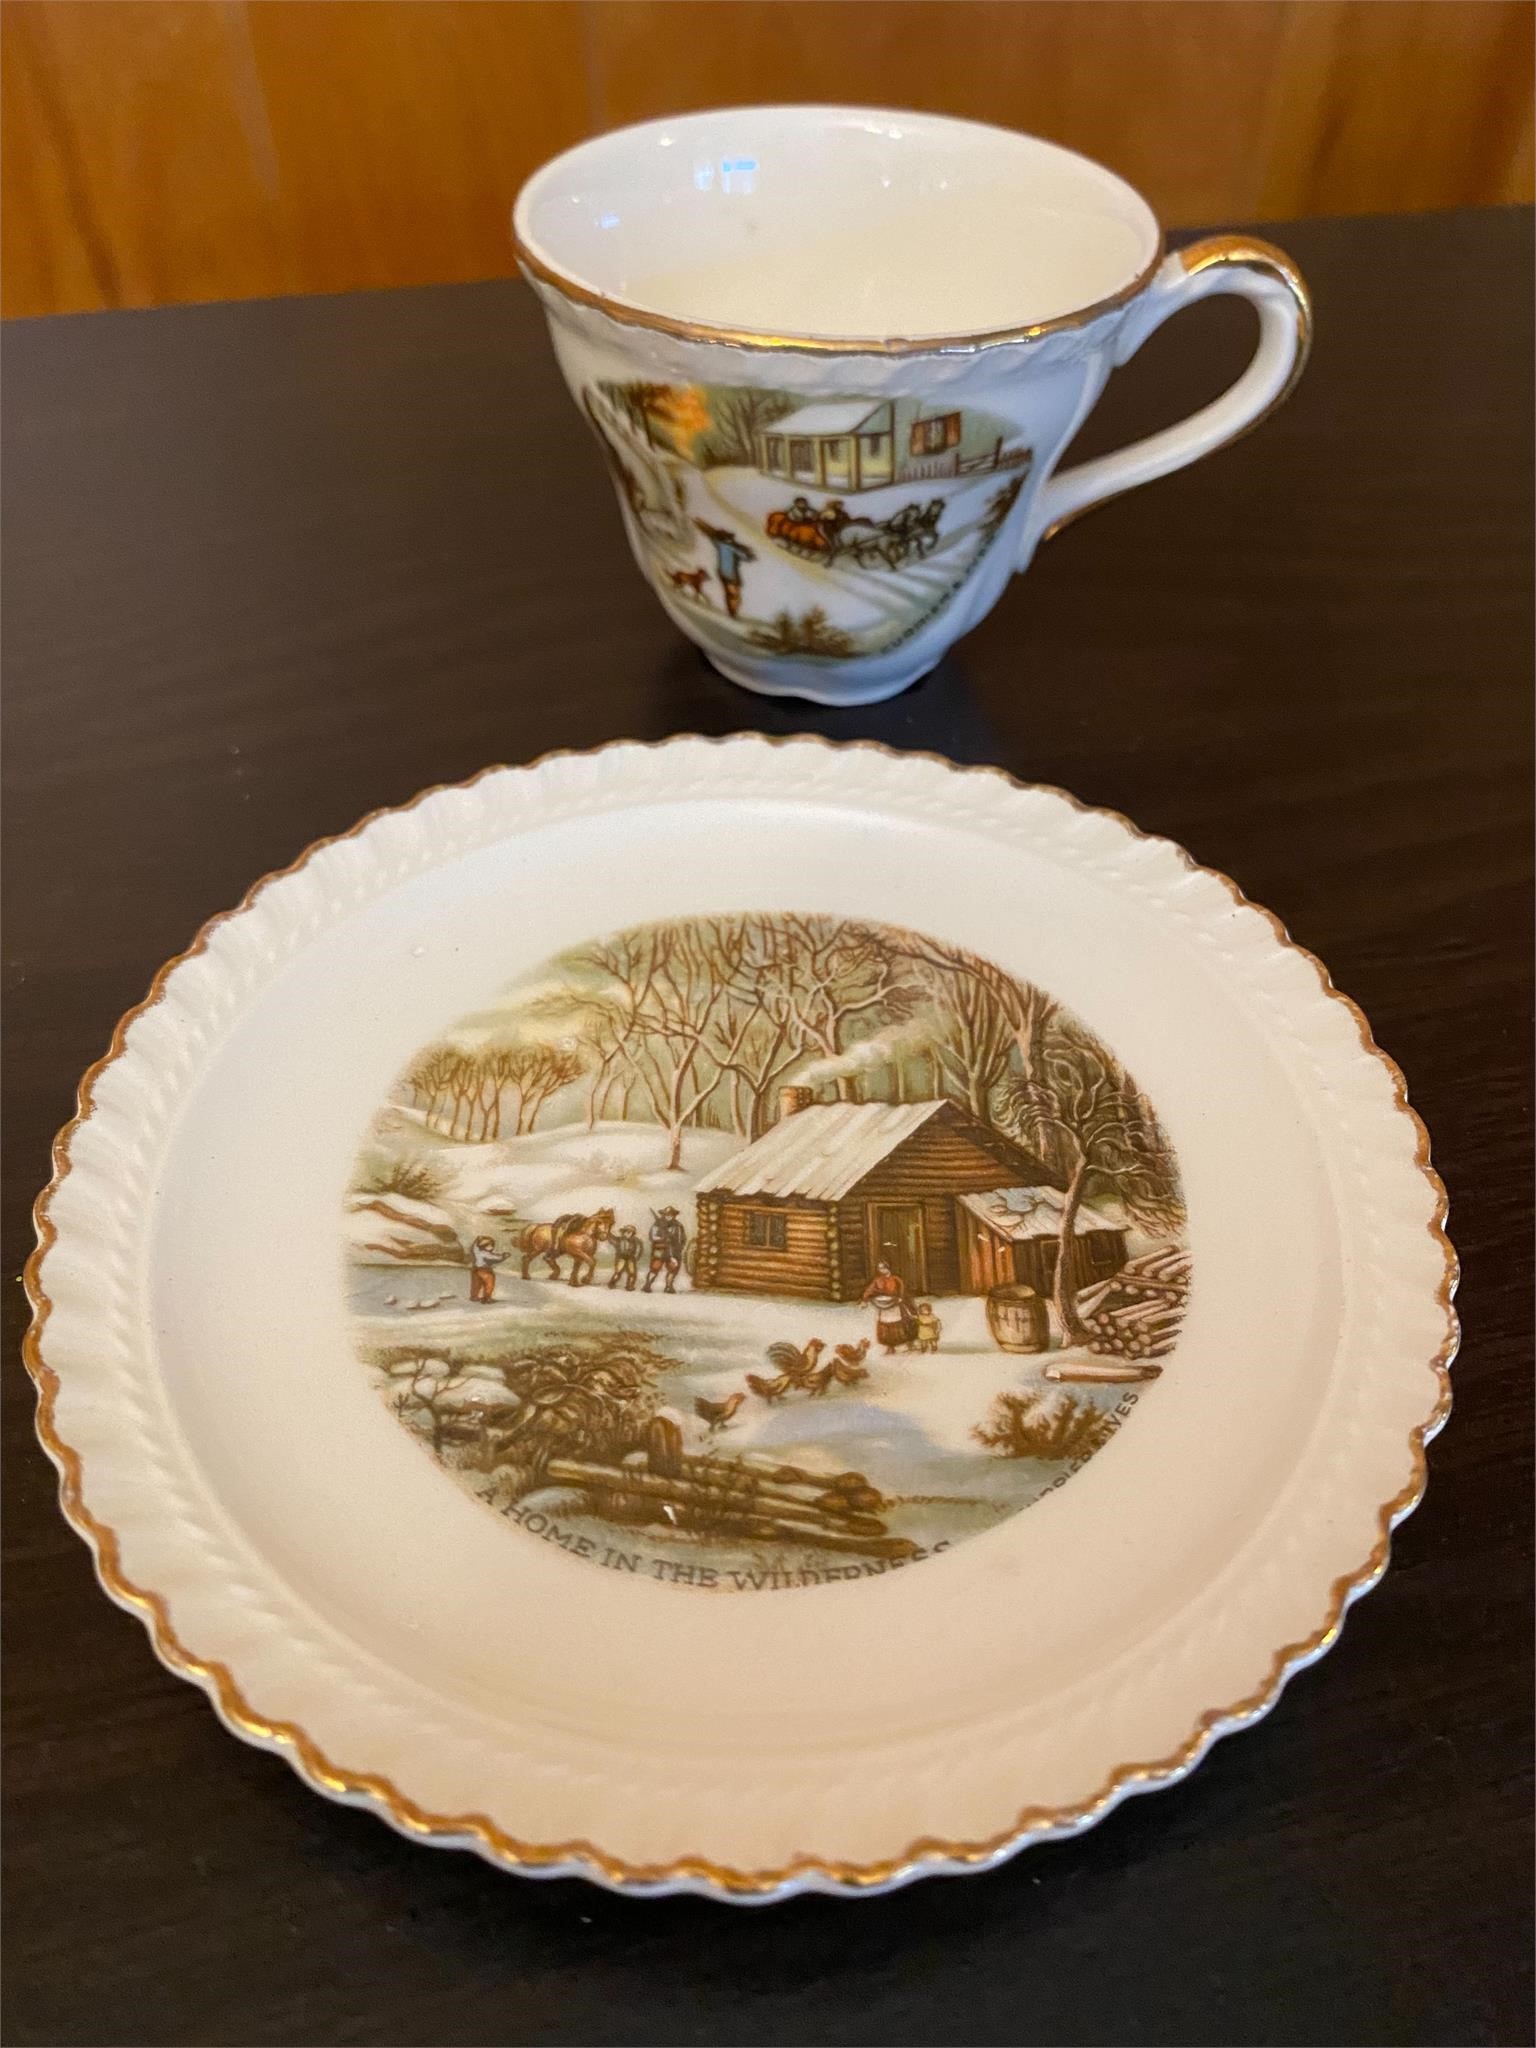 Currier & Ives: A Home in the Wilderness